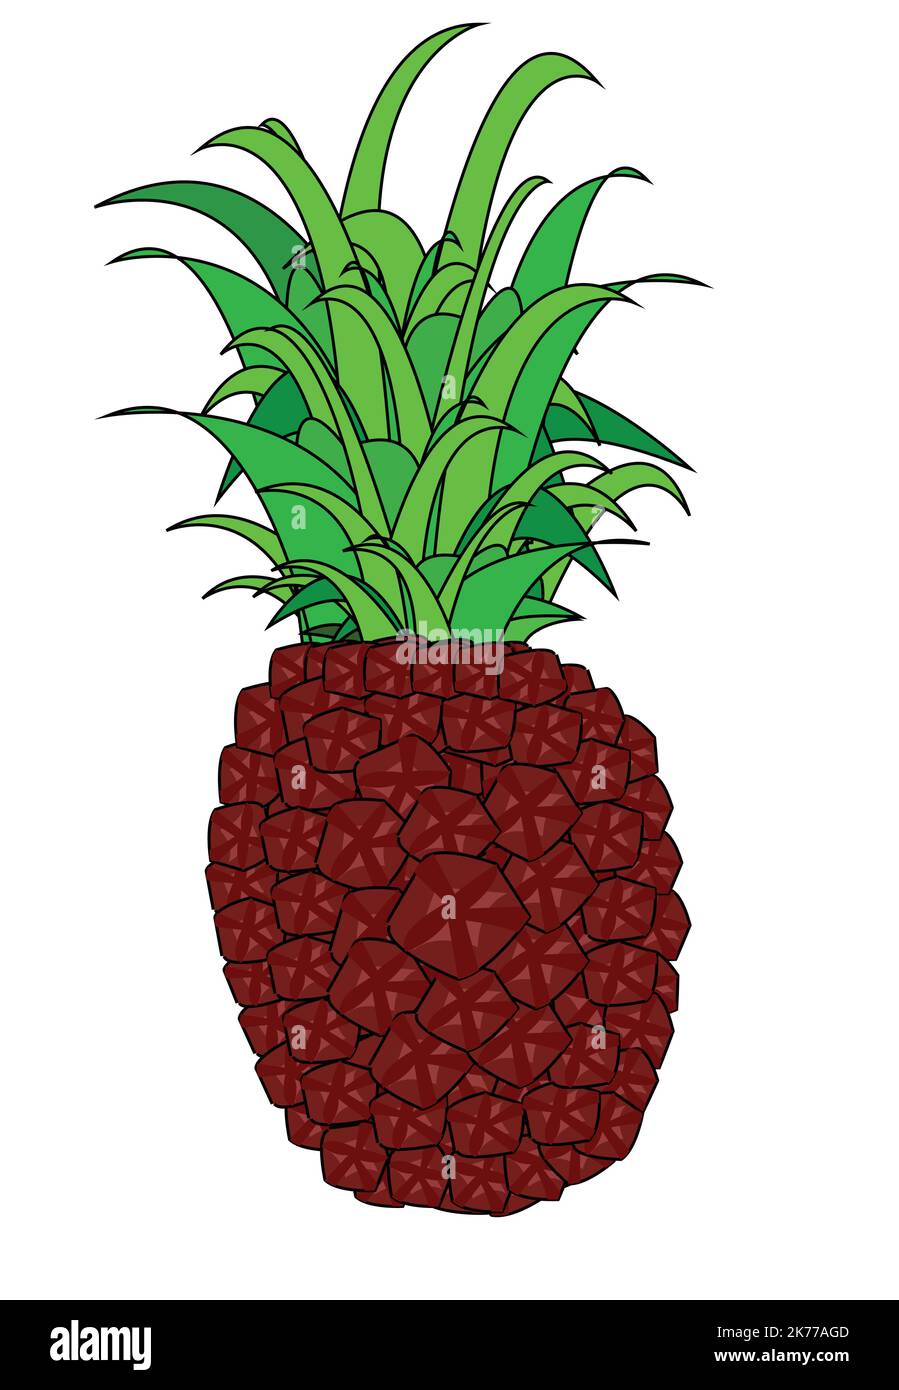 Colorful pineapple vector art design.Best graphic resources illustration. vector graphic design for icons and symbols and logo designing Stock Vector